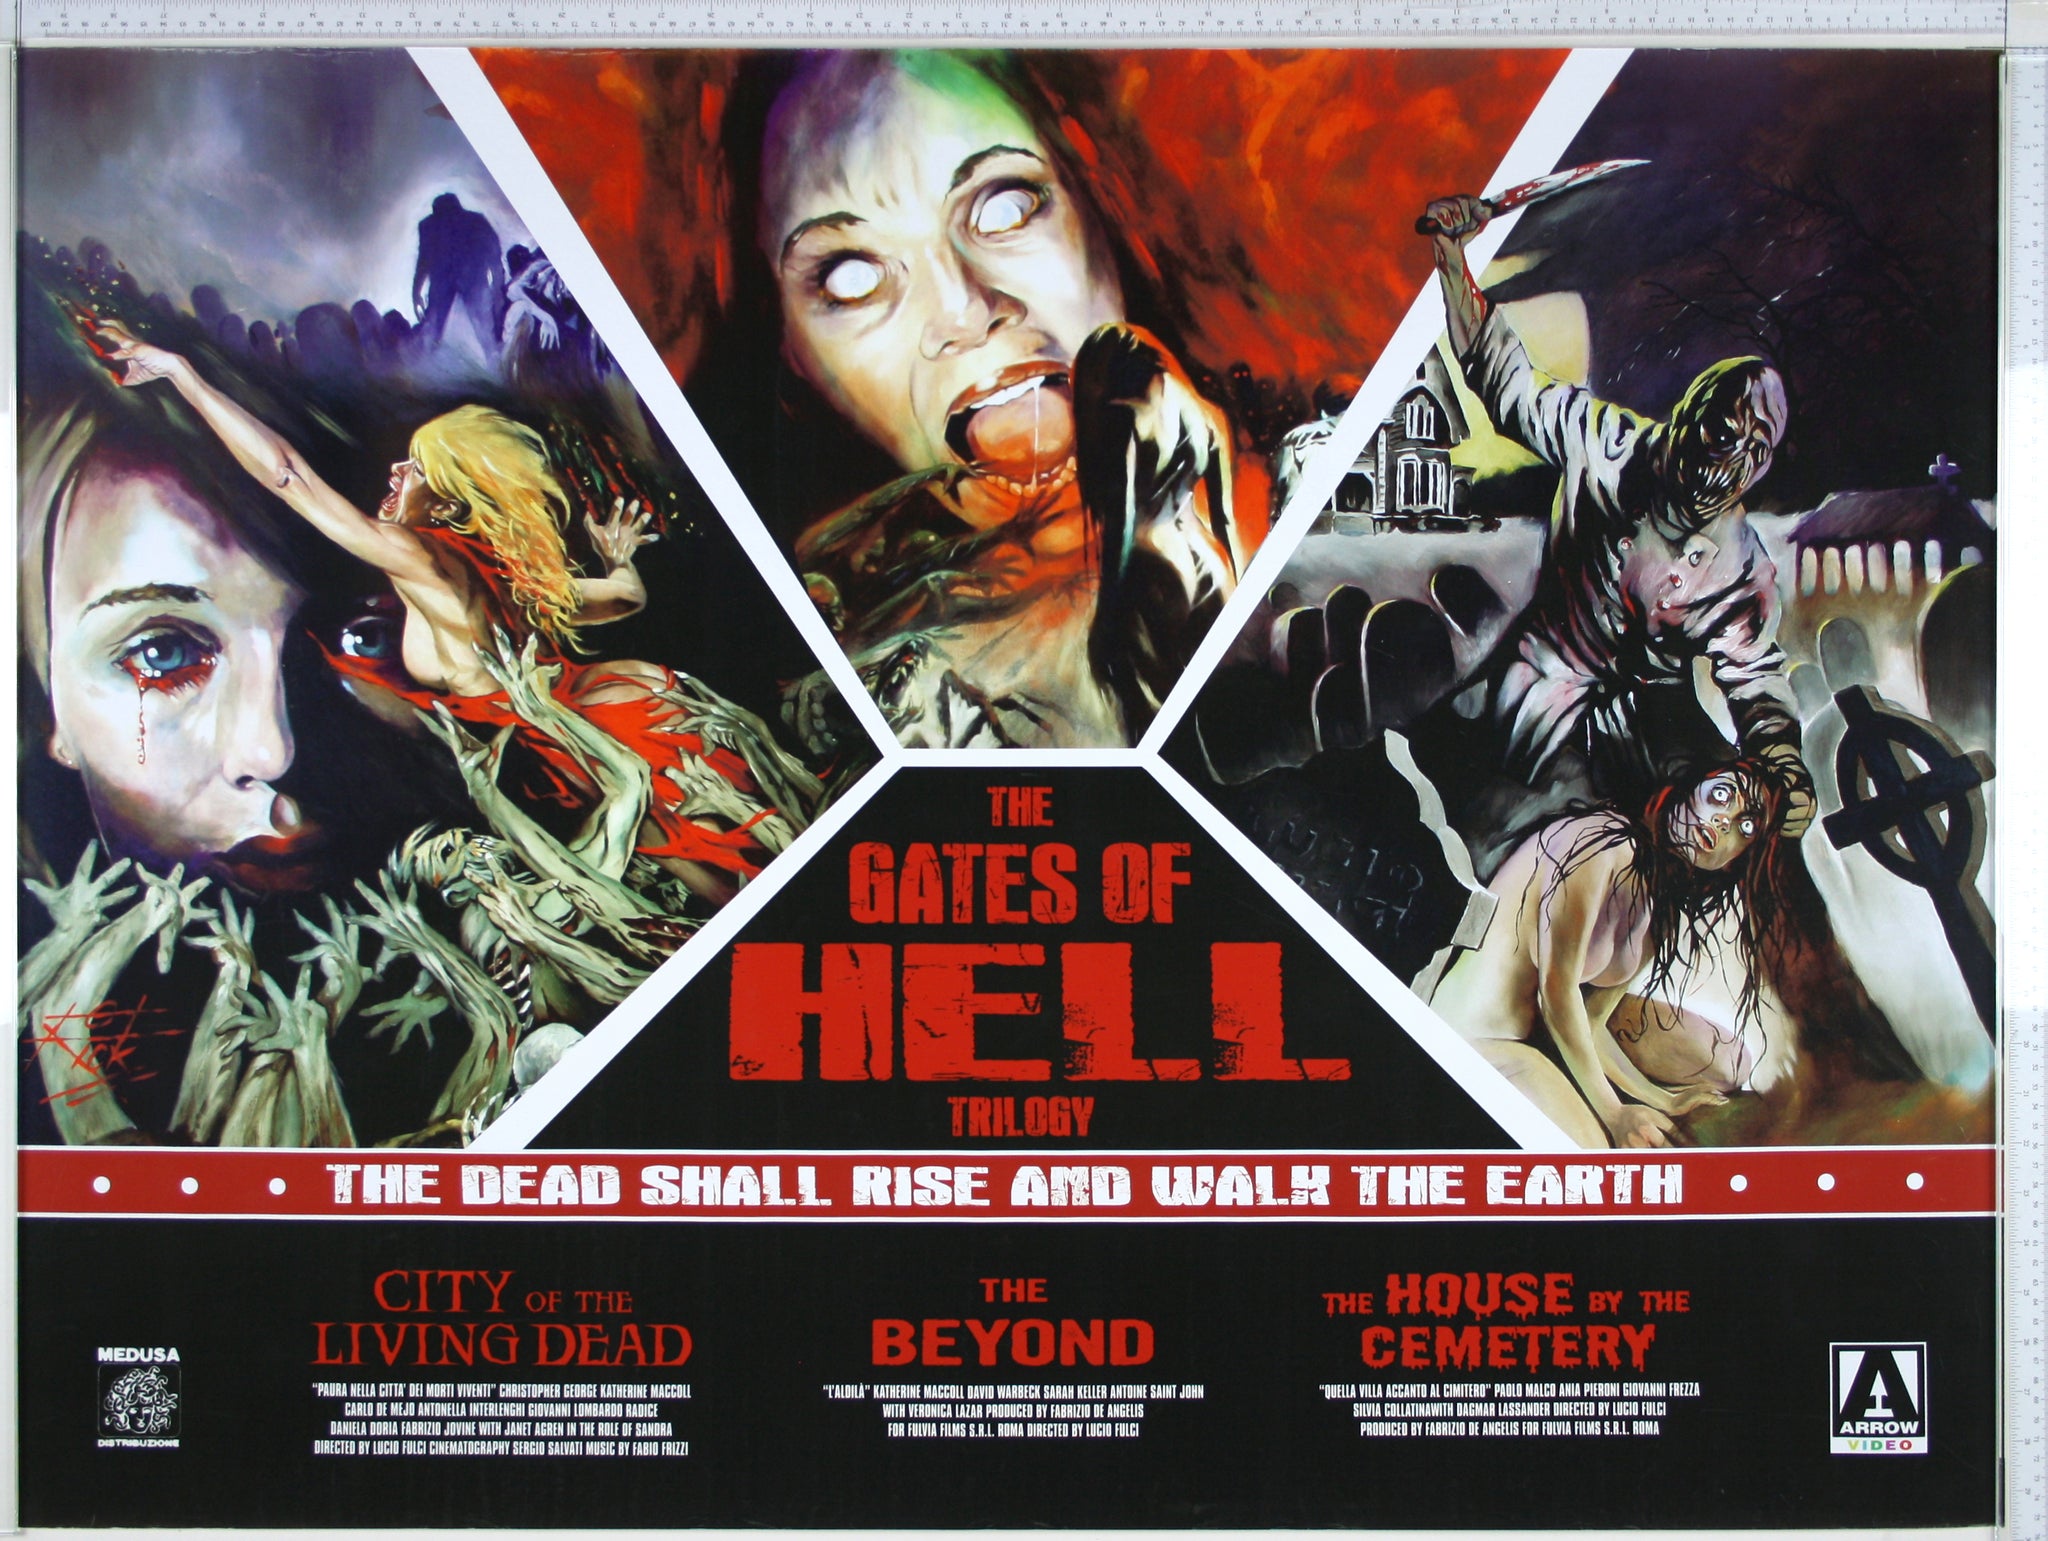 Three Bluray artworks for Fulci's Gates of Hell films, with eye-bleeding women, hands reaching from graves and graveyard monster.